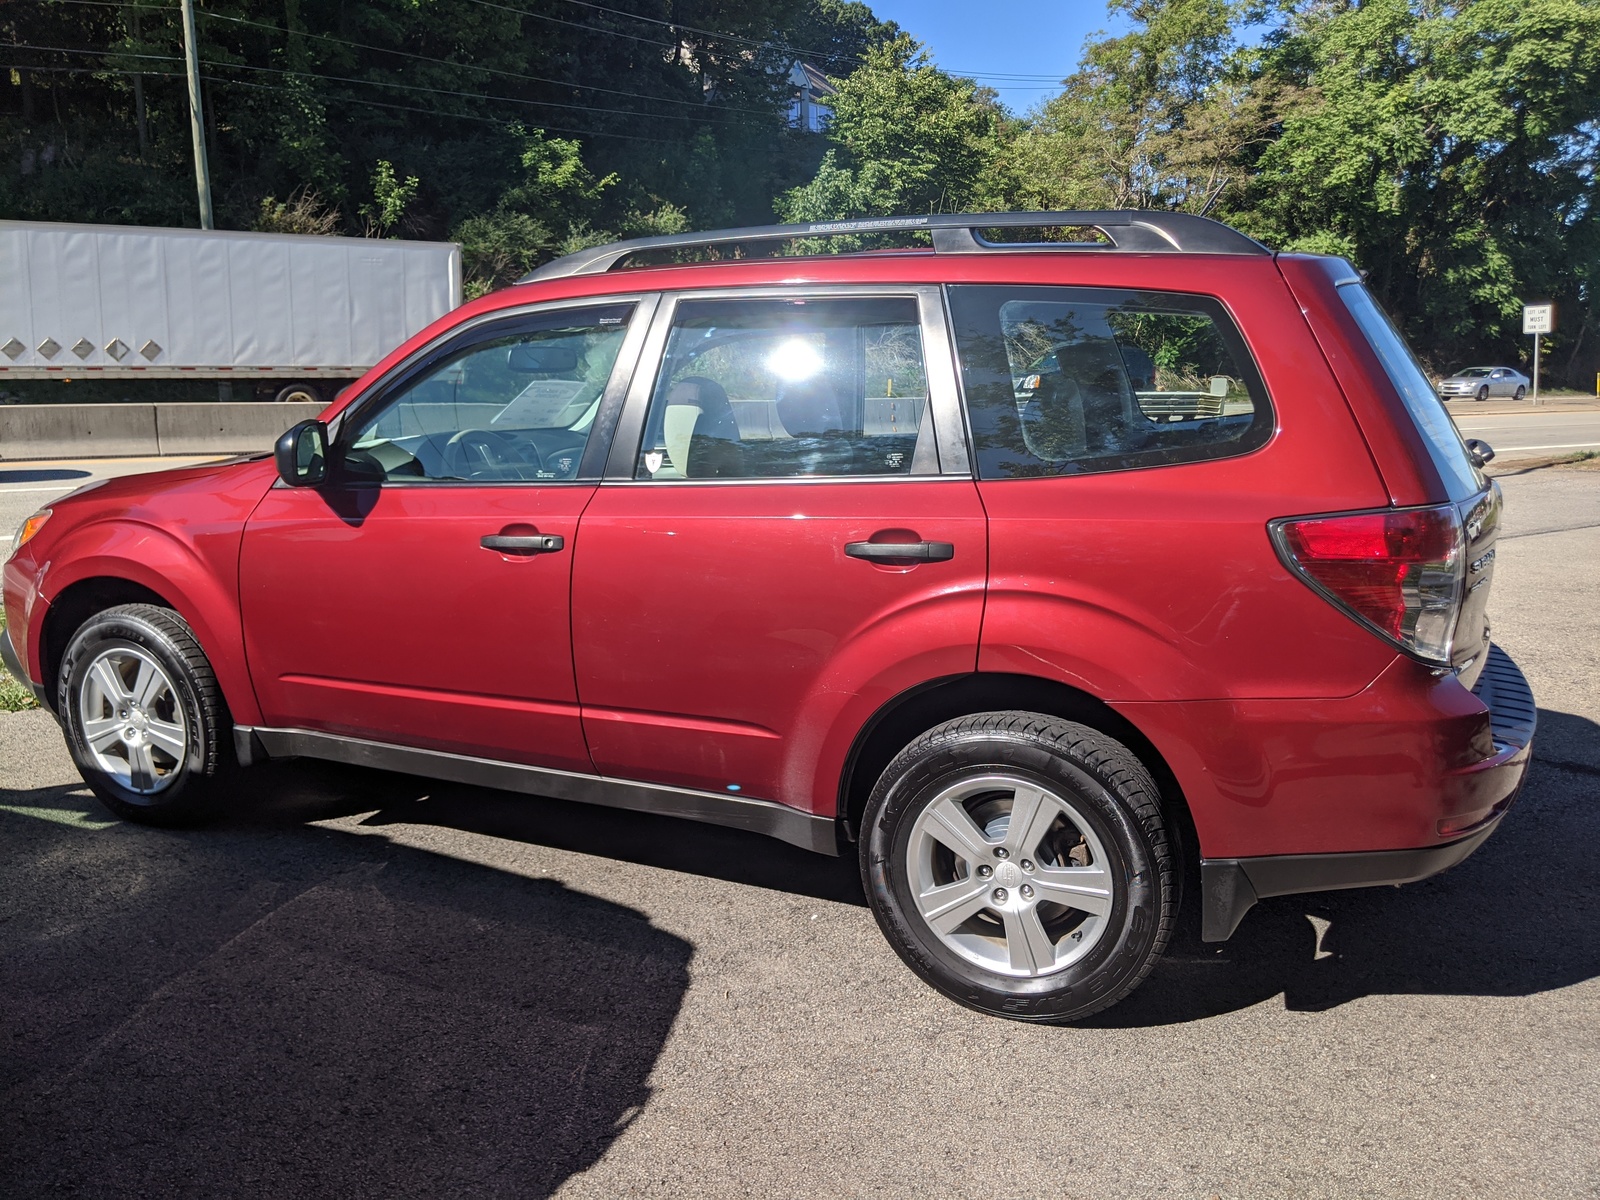 PreOwned 2013 Subaru Forester 2.5X in Camellia Red Pearl